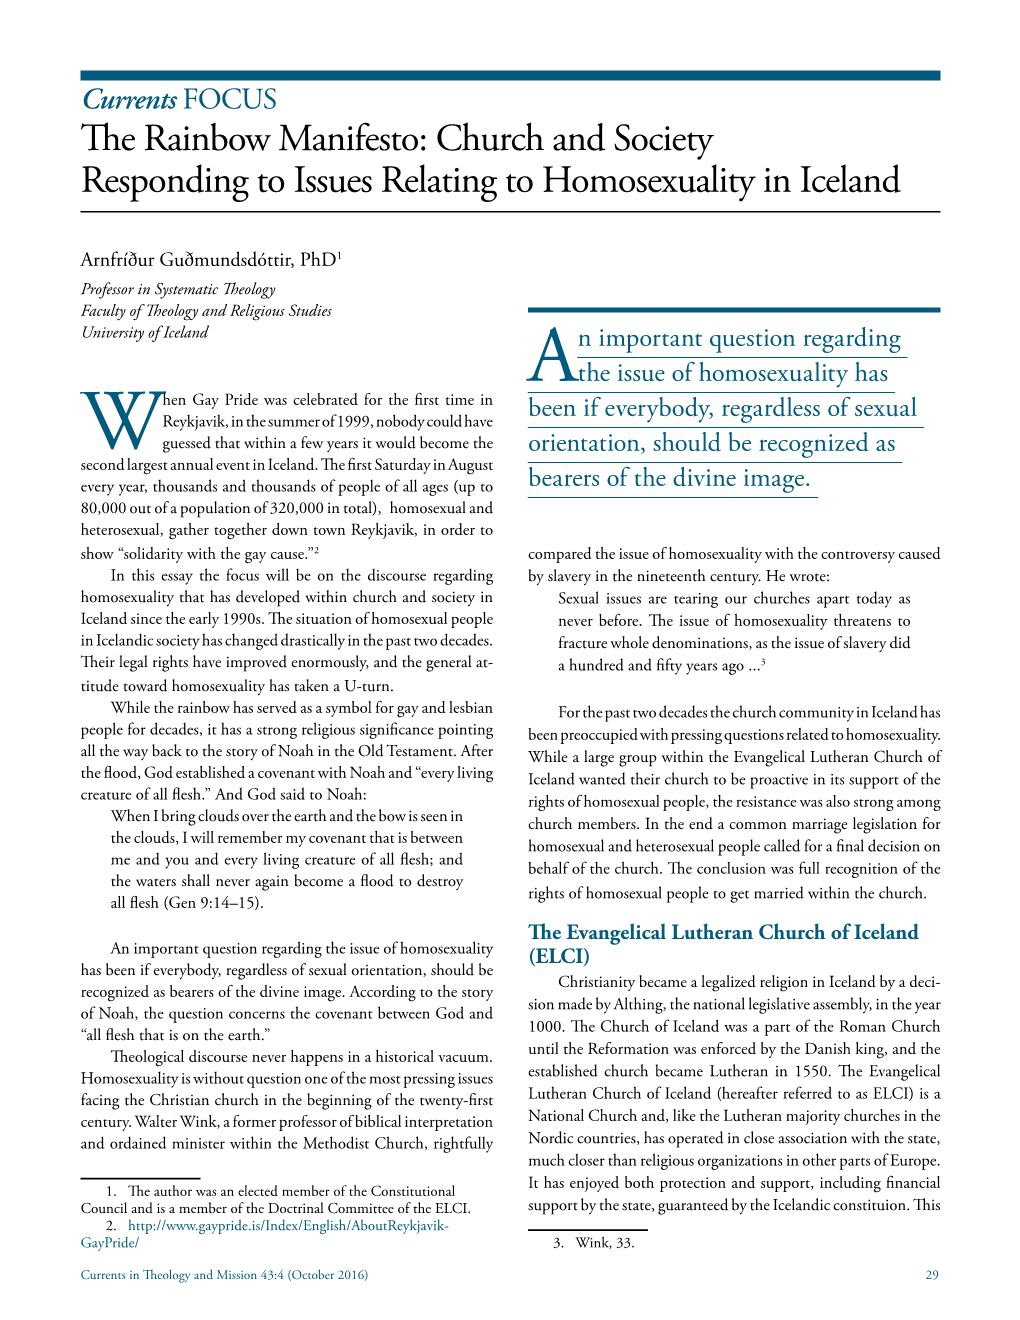 Church and Society Responding to Issues Relating to Homosexuality in Iceland